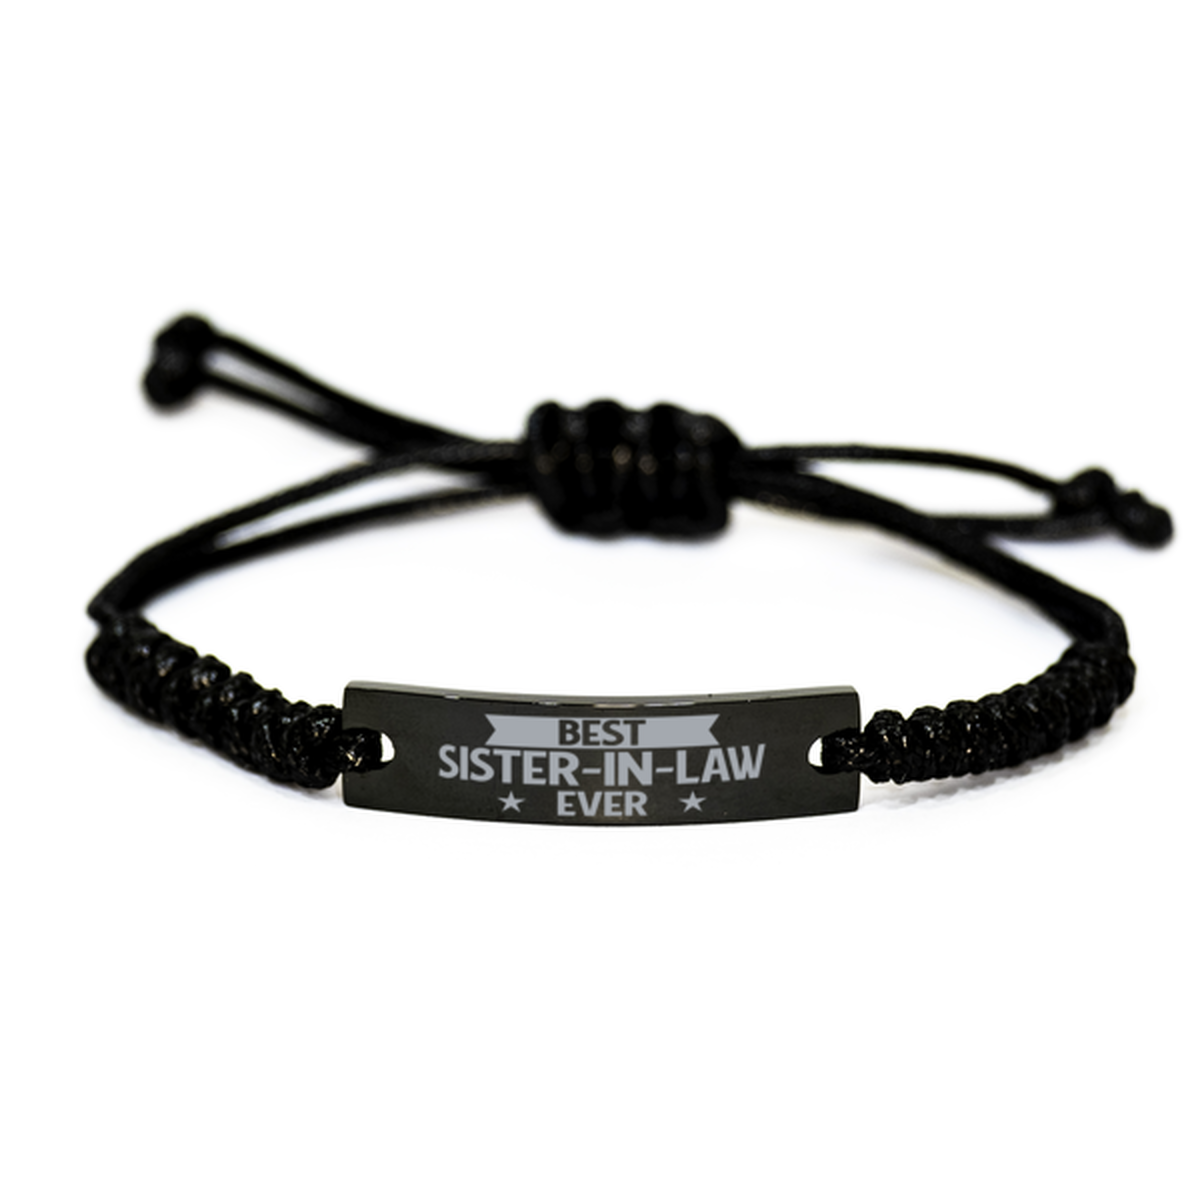 Best Sister-in-law Ever Sister-in-law Gifts, Funny Engraved Rope Bracelet For Sister-in-law, Birthday Family Gifts For Women